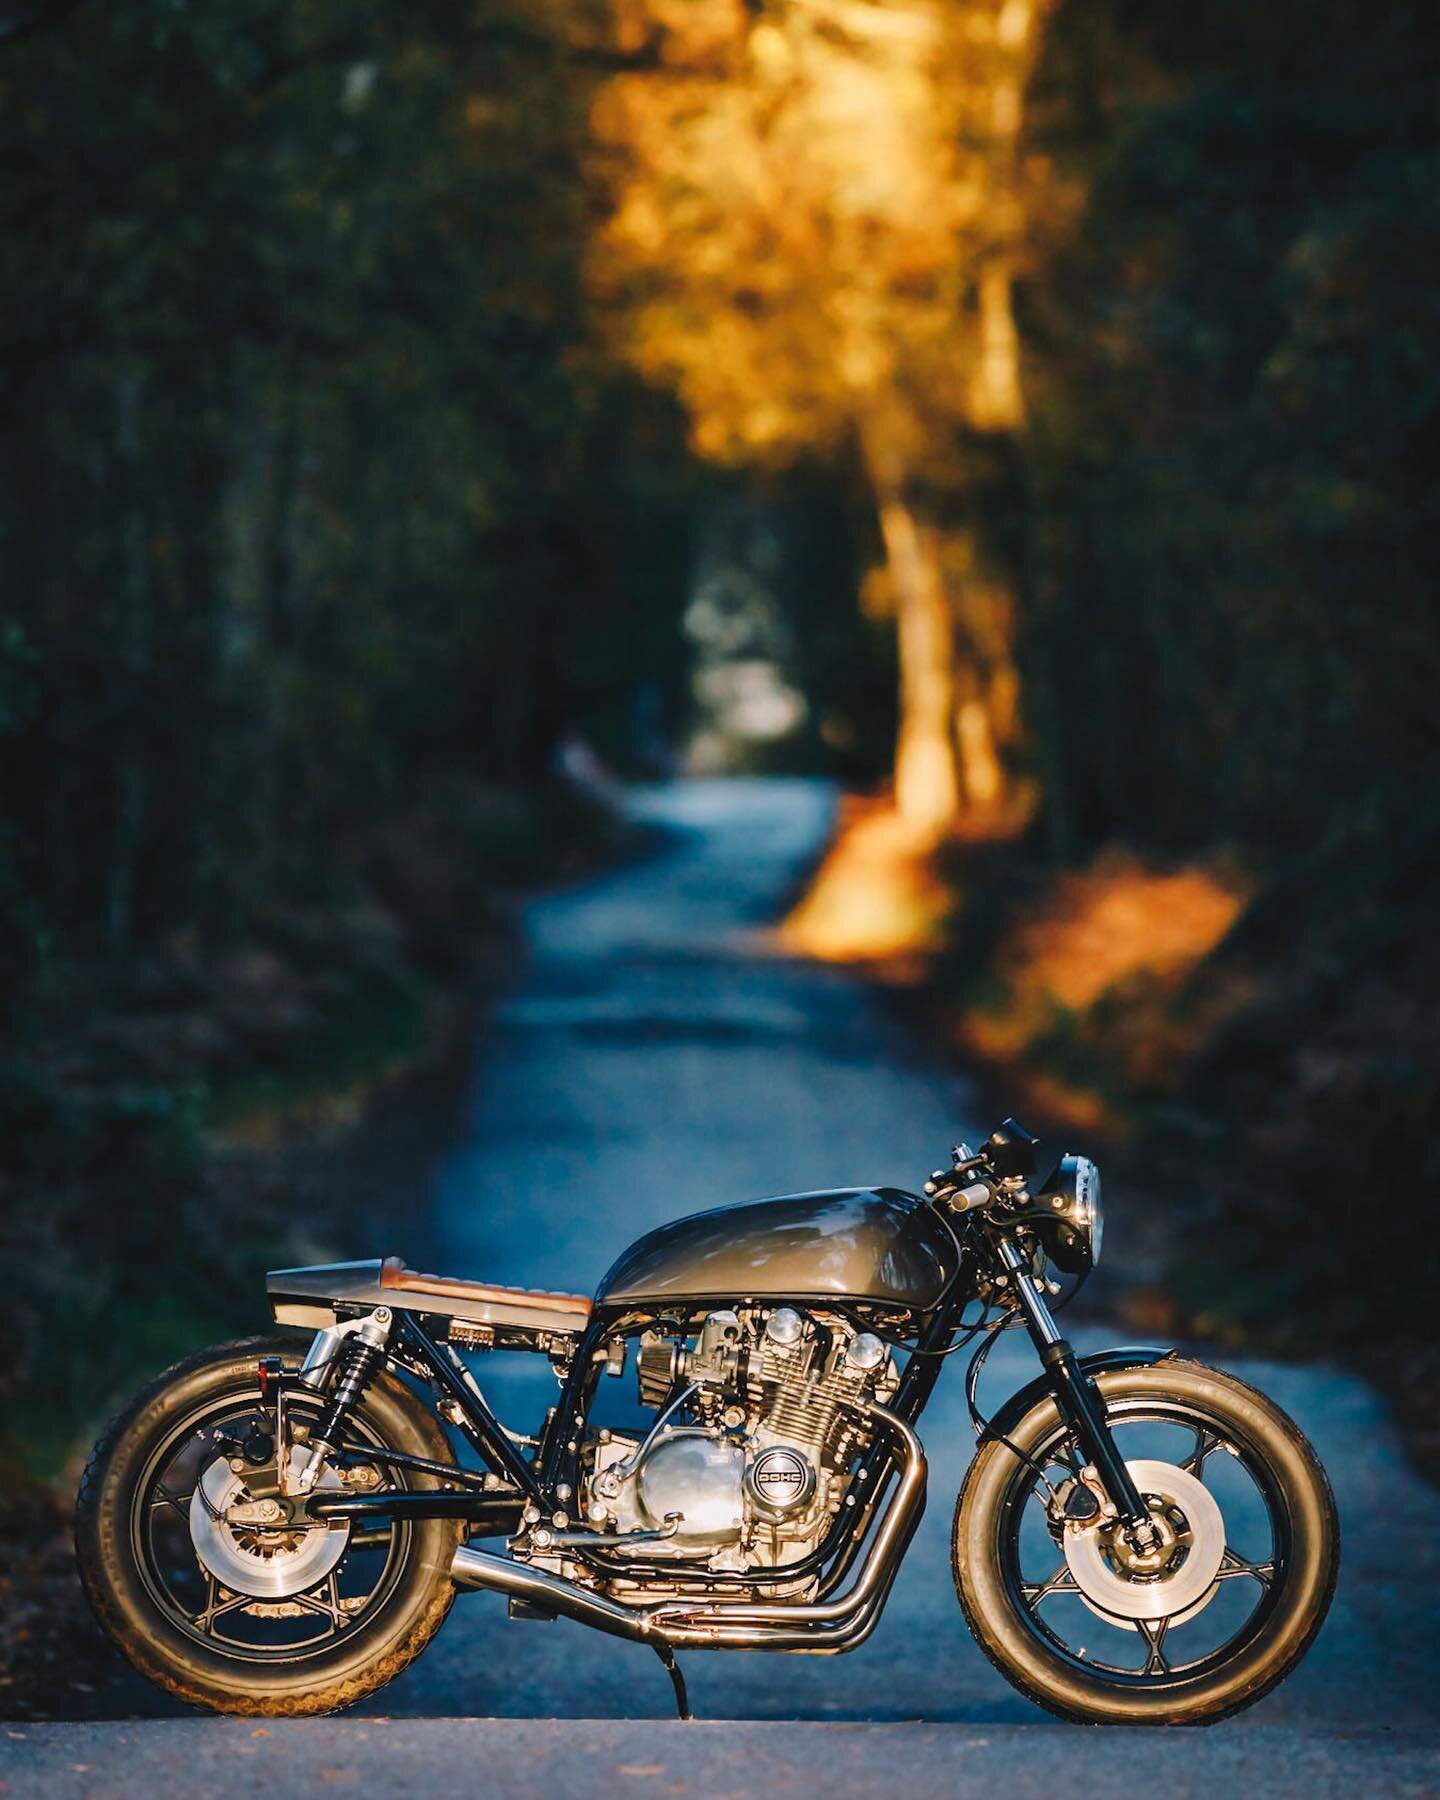 Swipe&gt;&gt;&gt;&gt;&gt;&gt;&gt;&gt;
Some more bike porn, this time a stunning Custom 1978 Suzuki GS750 by @petemann50. Check the link in my bio to see more photos 🤙😎
.
.
.
.
.
.
.
.
. 
#twinshock #custommotorcycle #classicmotorcycle #bikeexif #ca